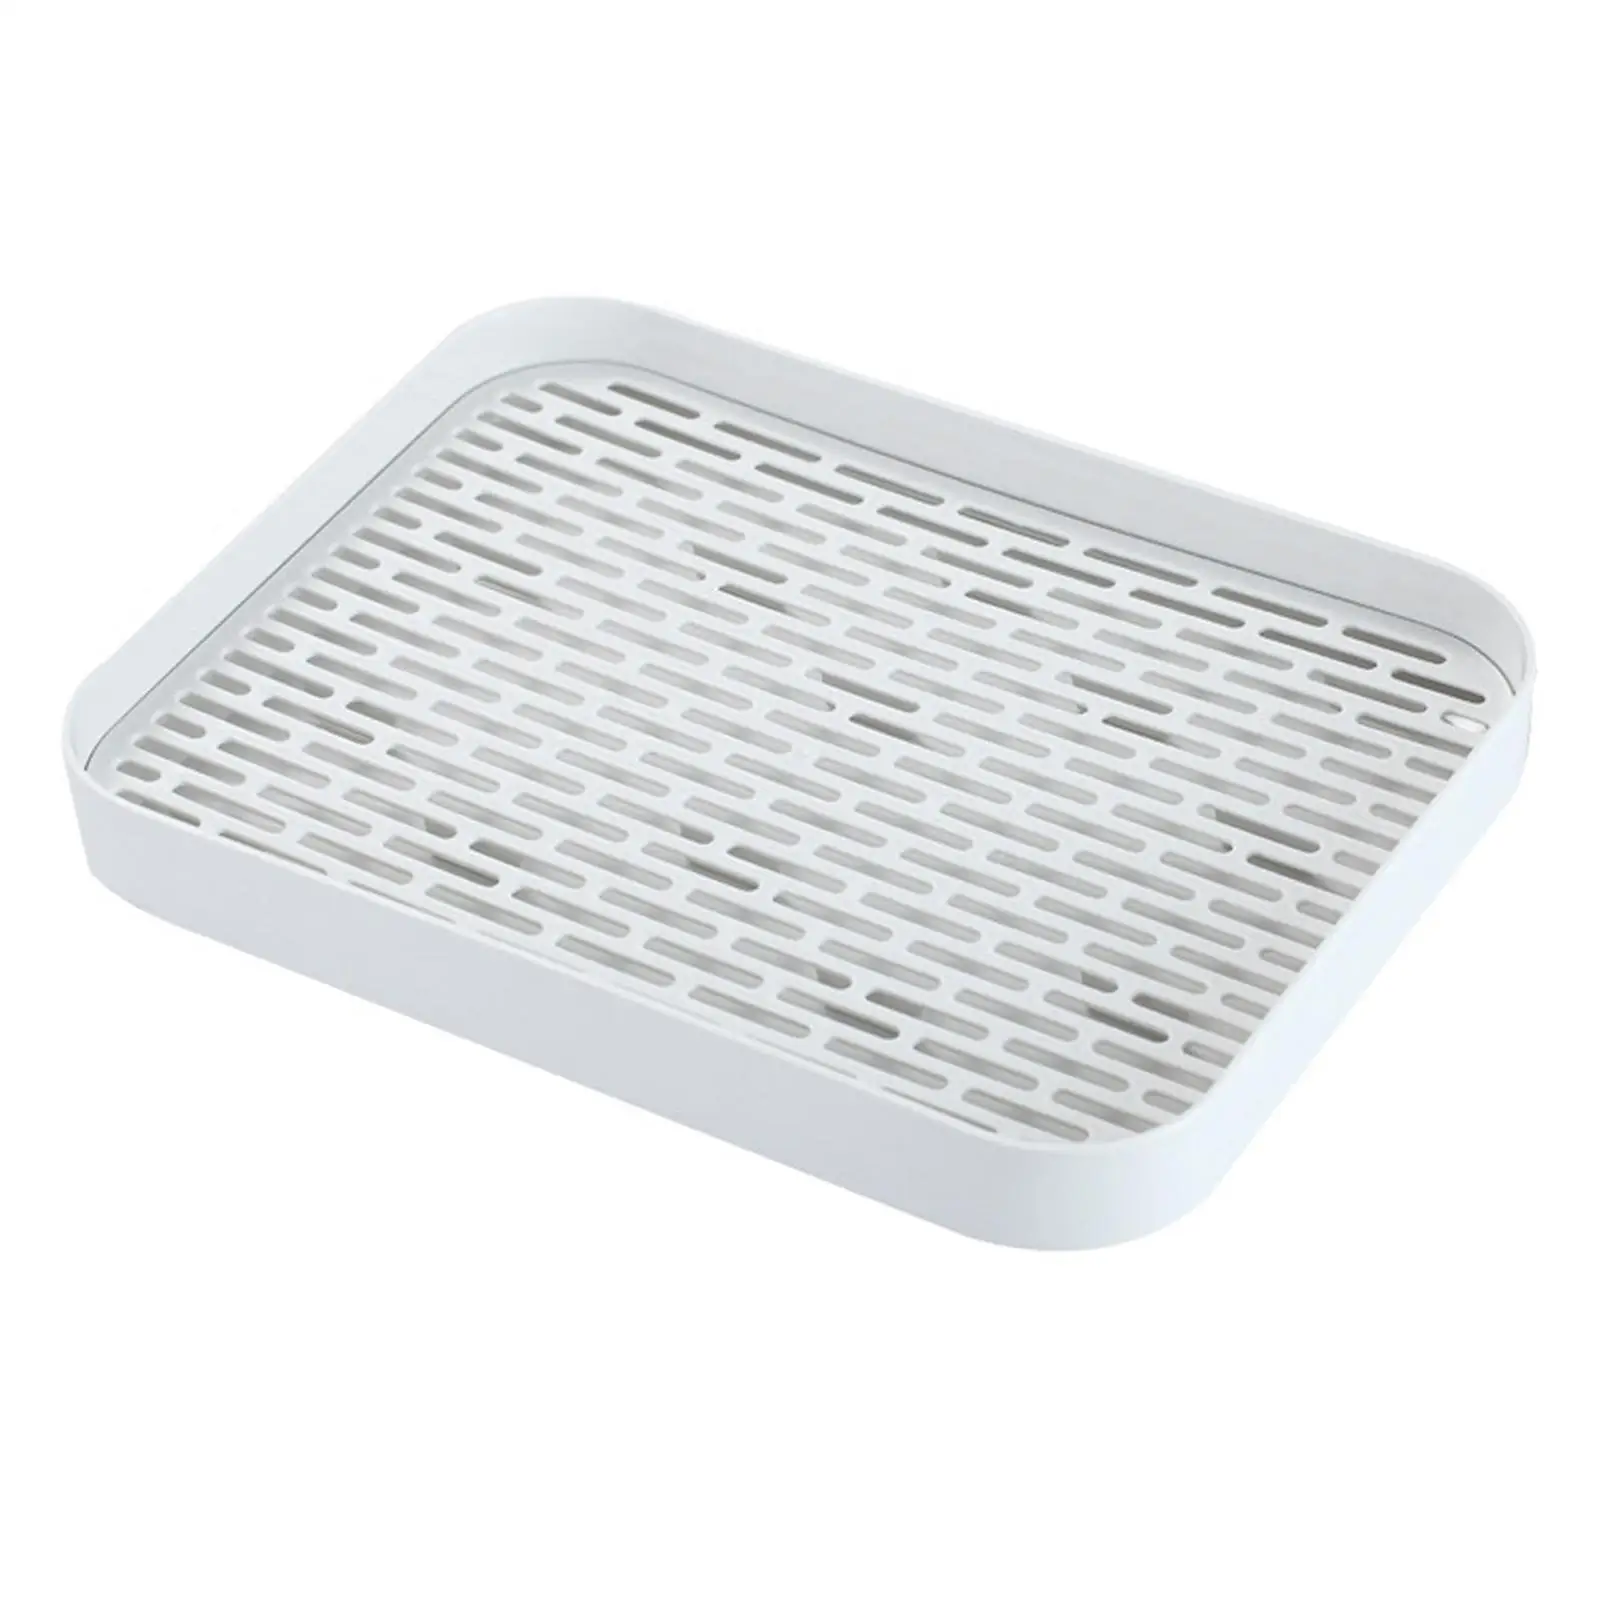 Countertop Drain Tray Drainboard Drainer Shelf Basket for Cup Home Kitchen